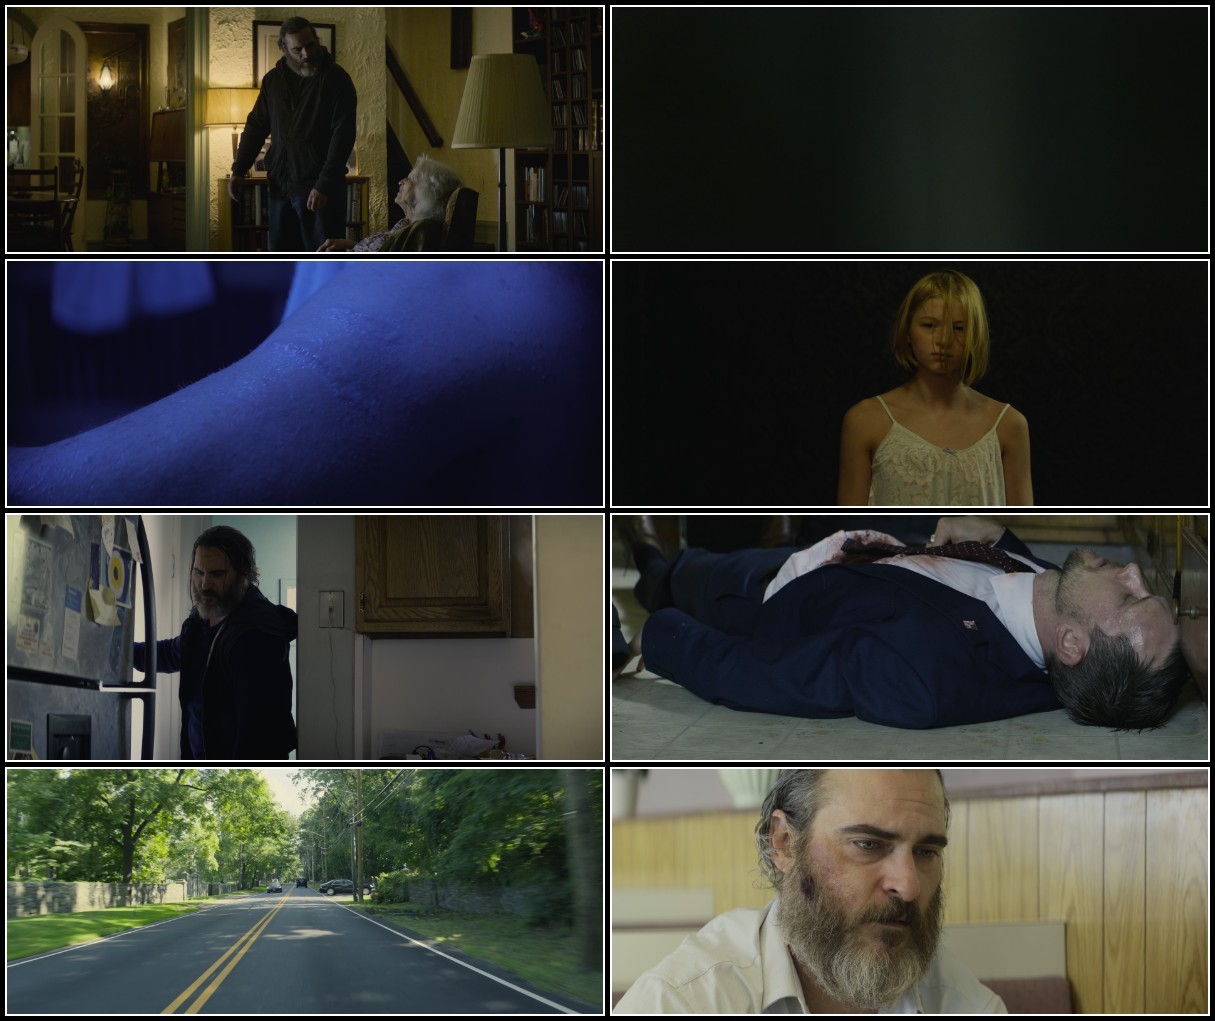 You Were Never Really Here (2017) 2160p 4K WEB 5.1 YTS